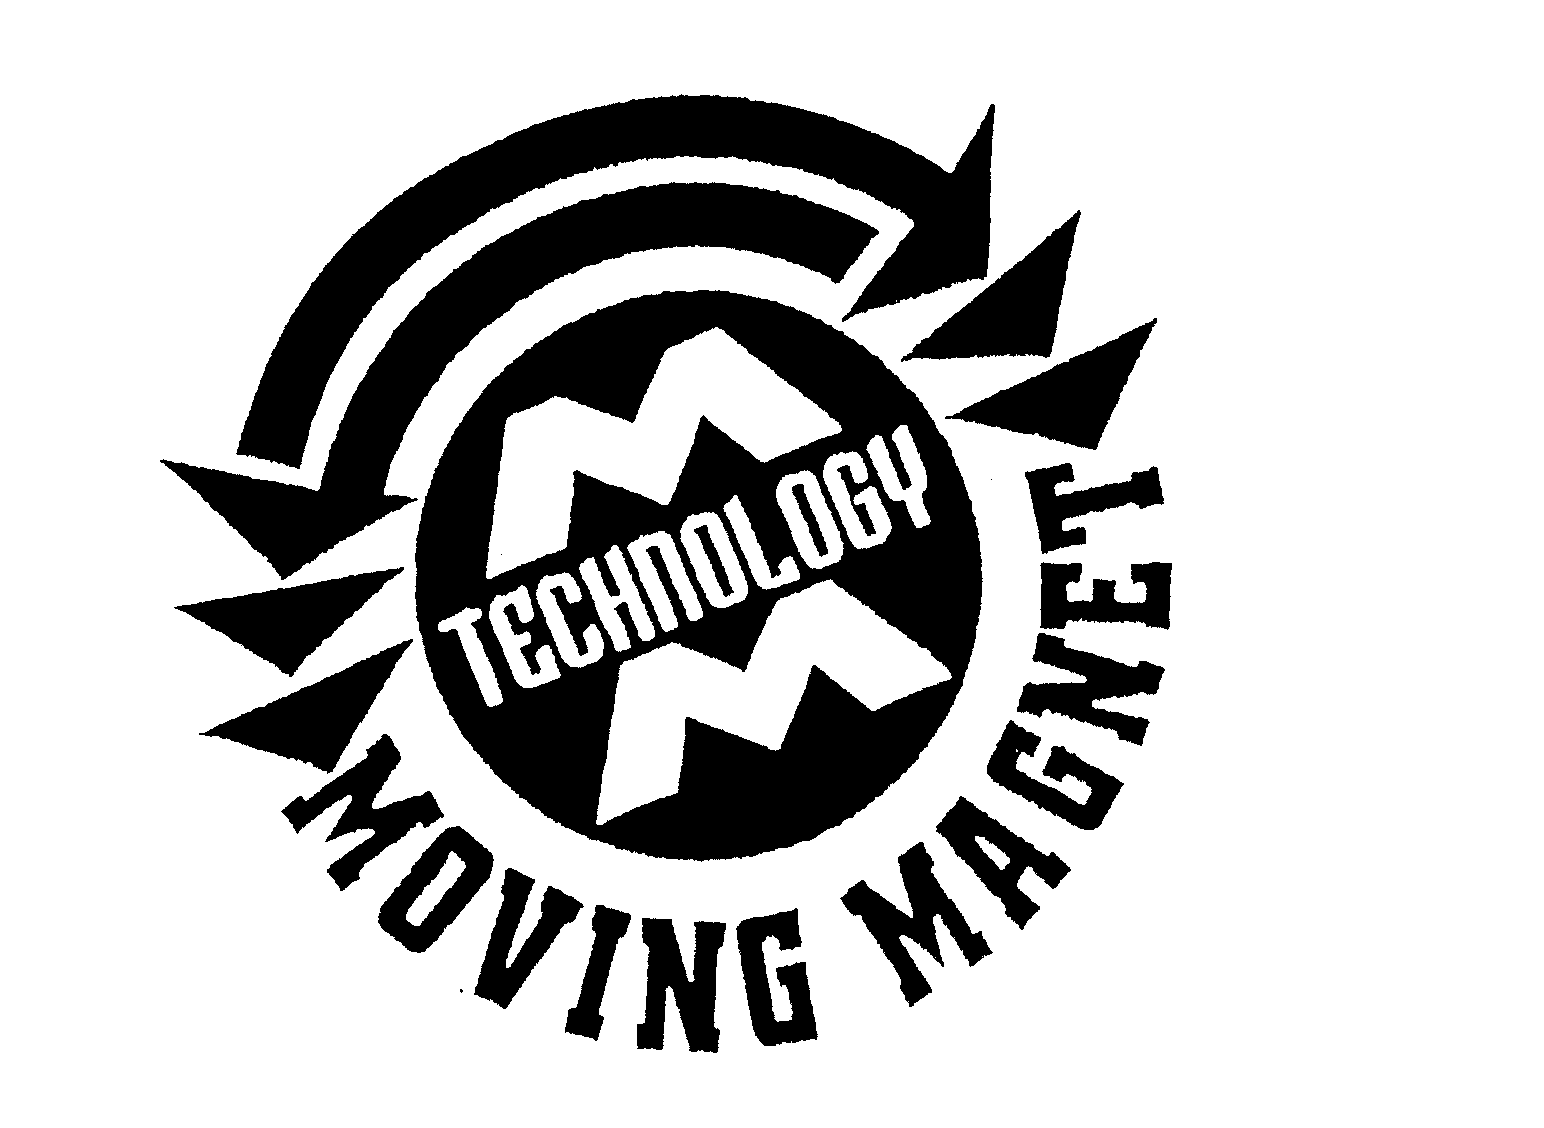  TECHNOLOGY MOVING MAGNET